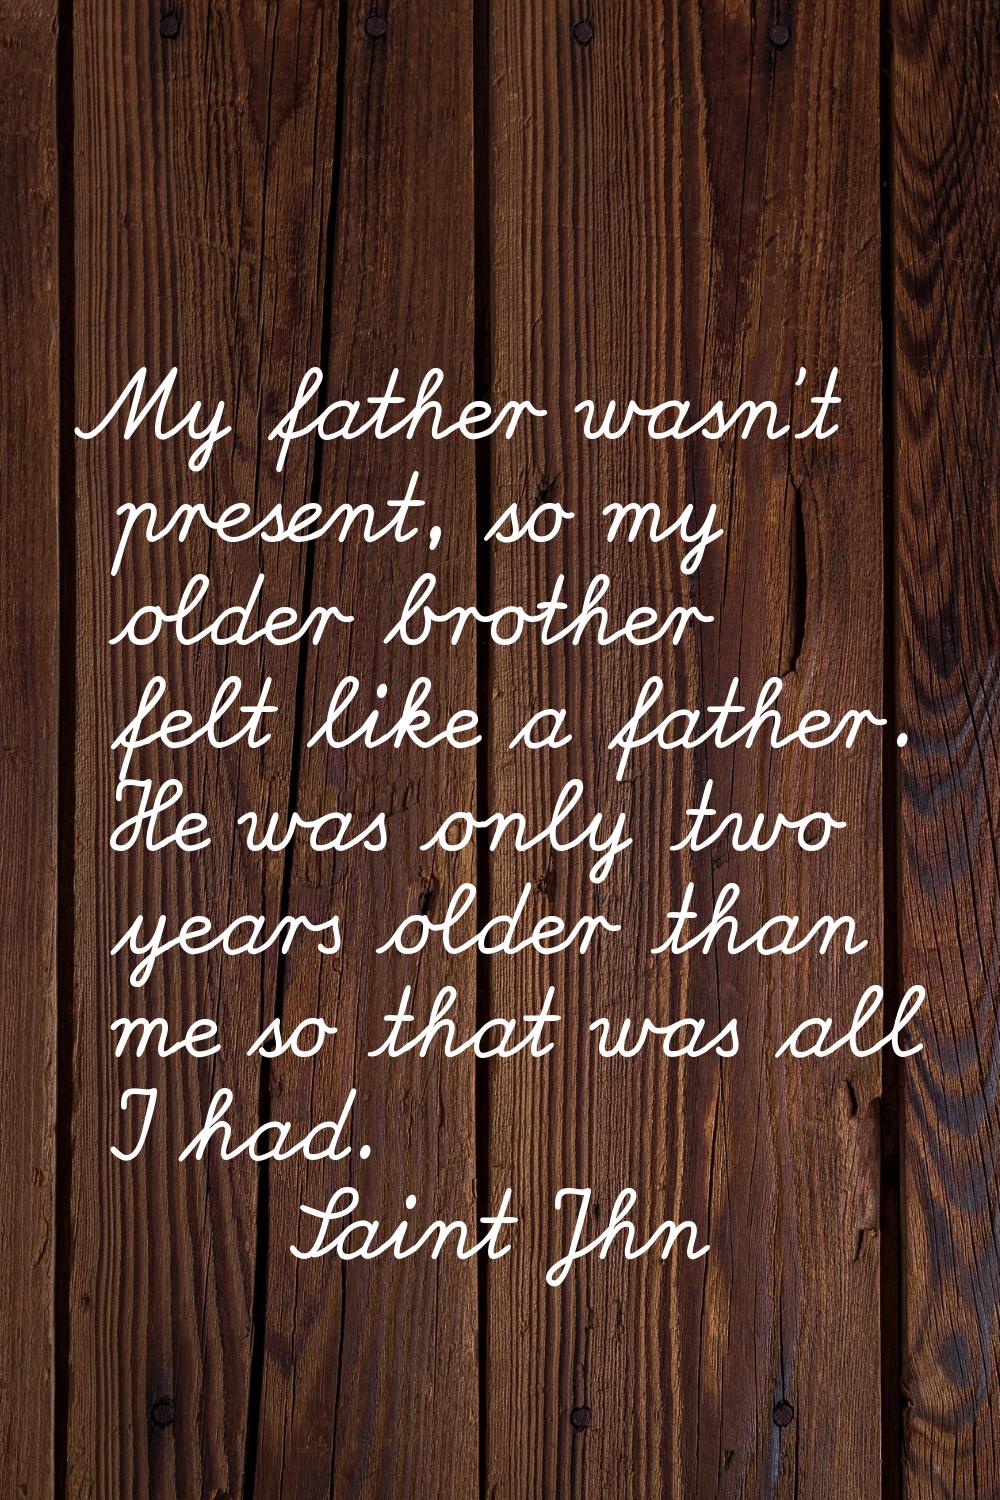 My father wasn't present, so my older brother felt like a father. He was only two years older than 